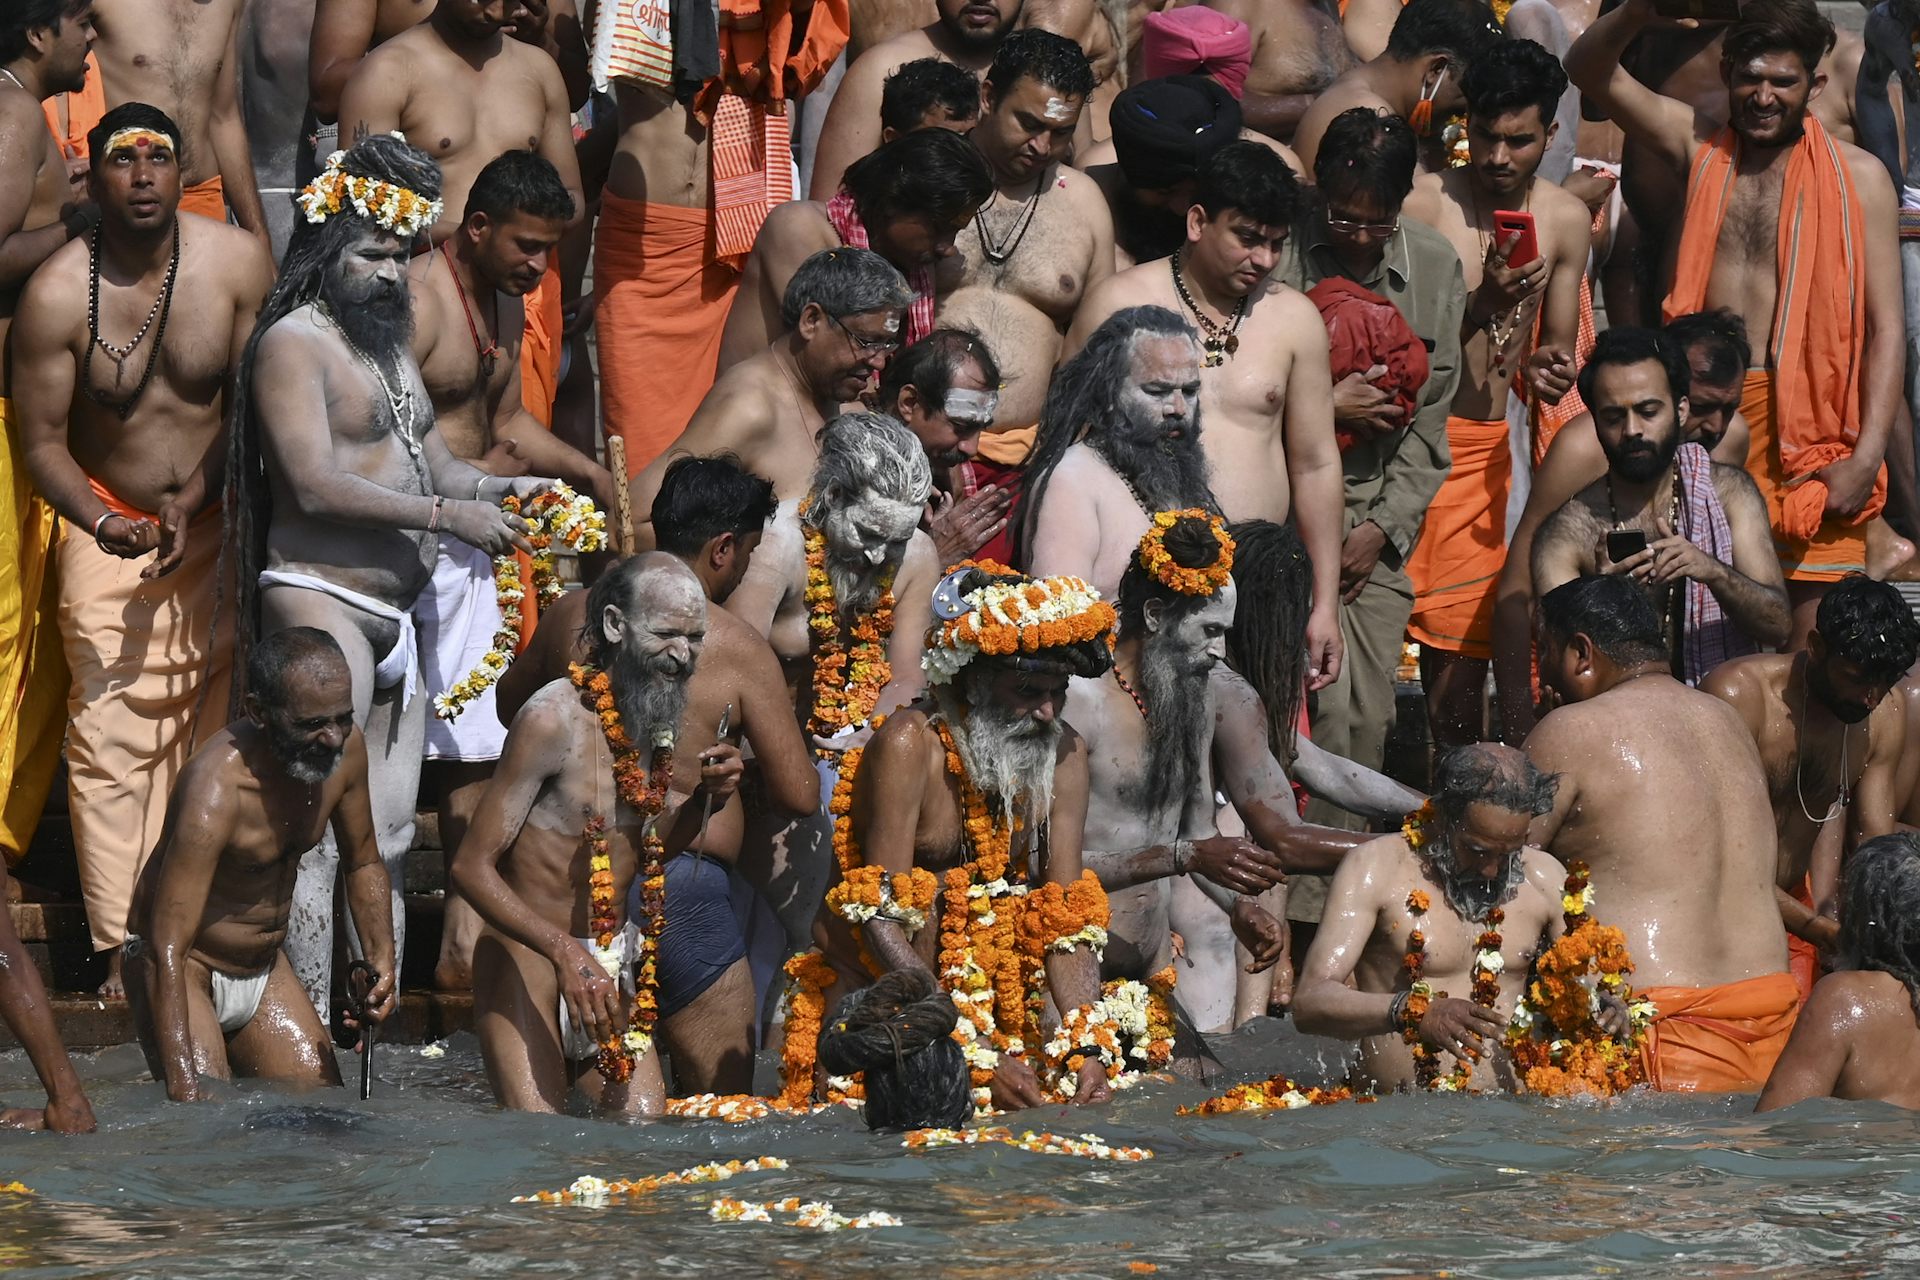 Men are shoulder to shoulder on the edge of the water. Most are naked from the waist up. Many wear flowers and orange clothing.